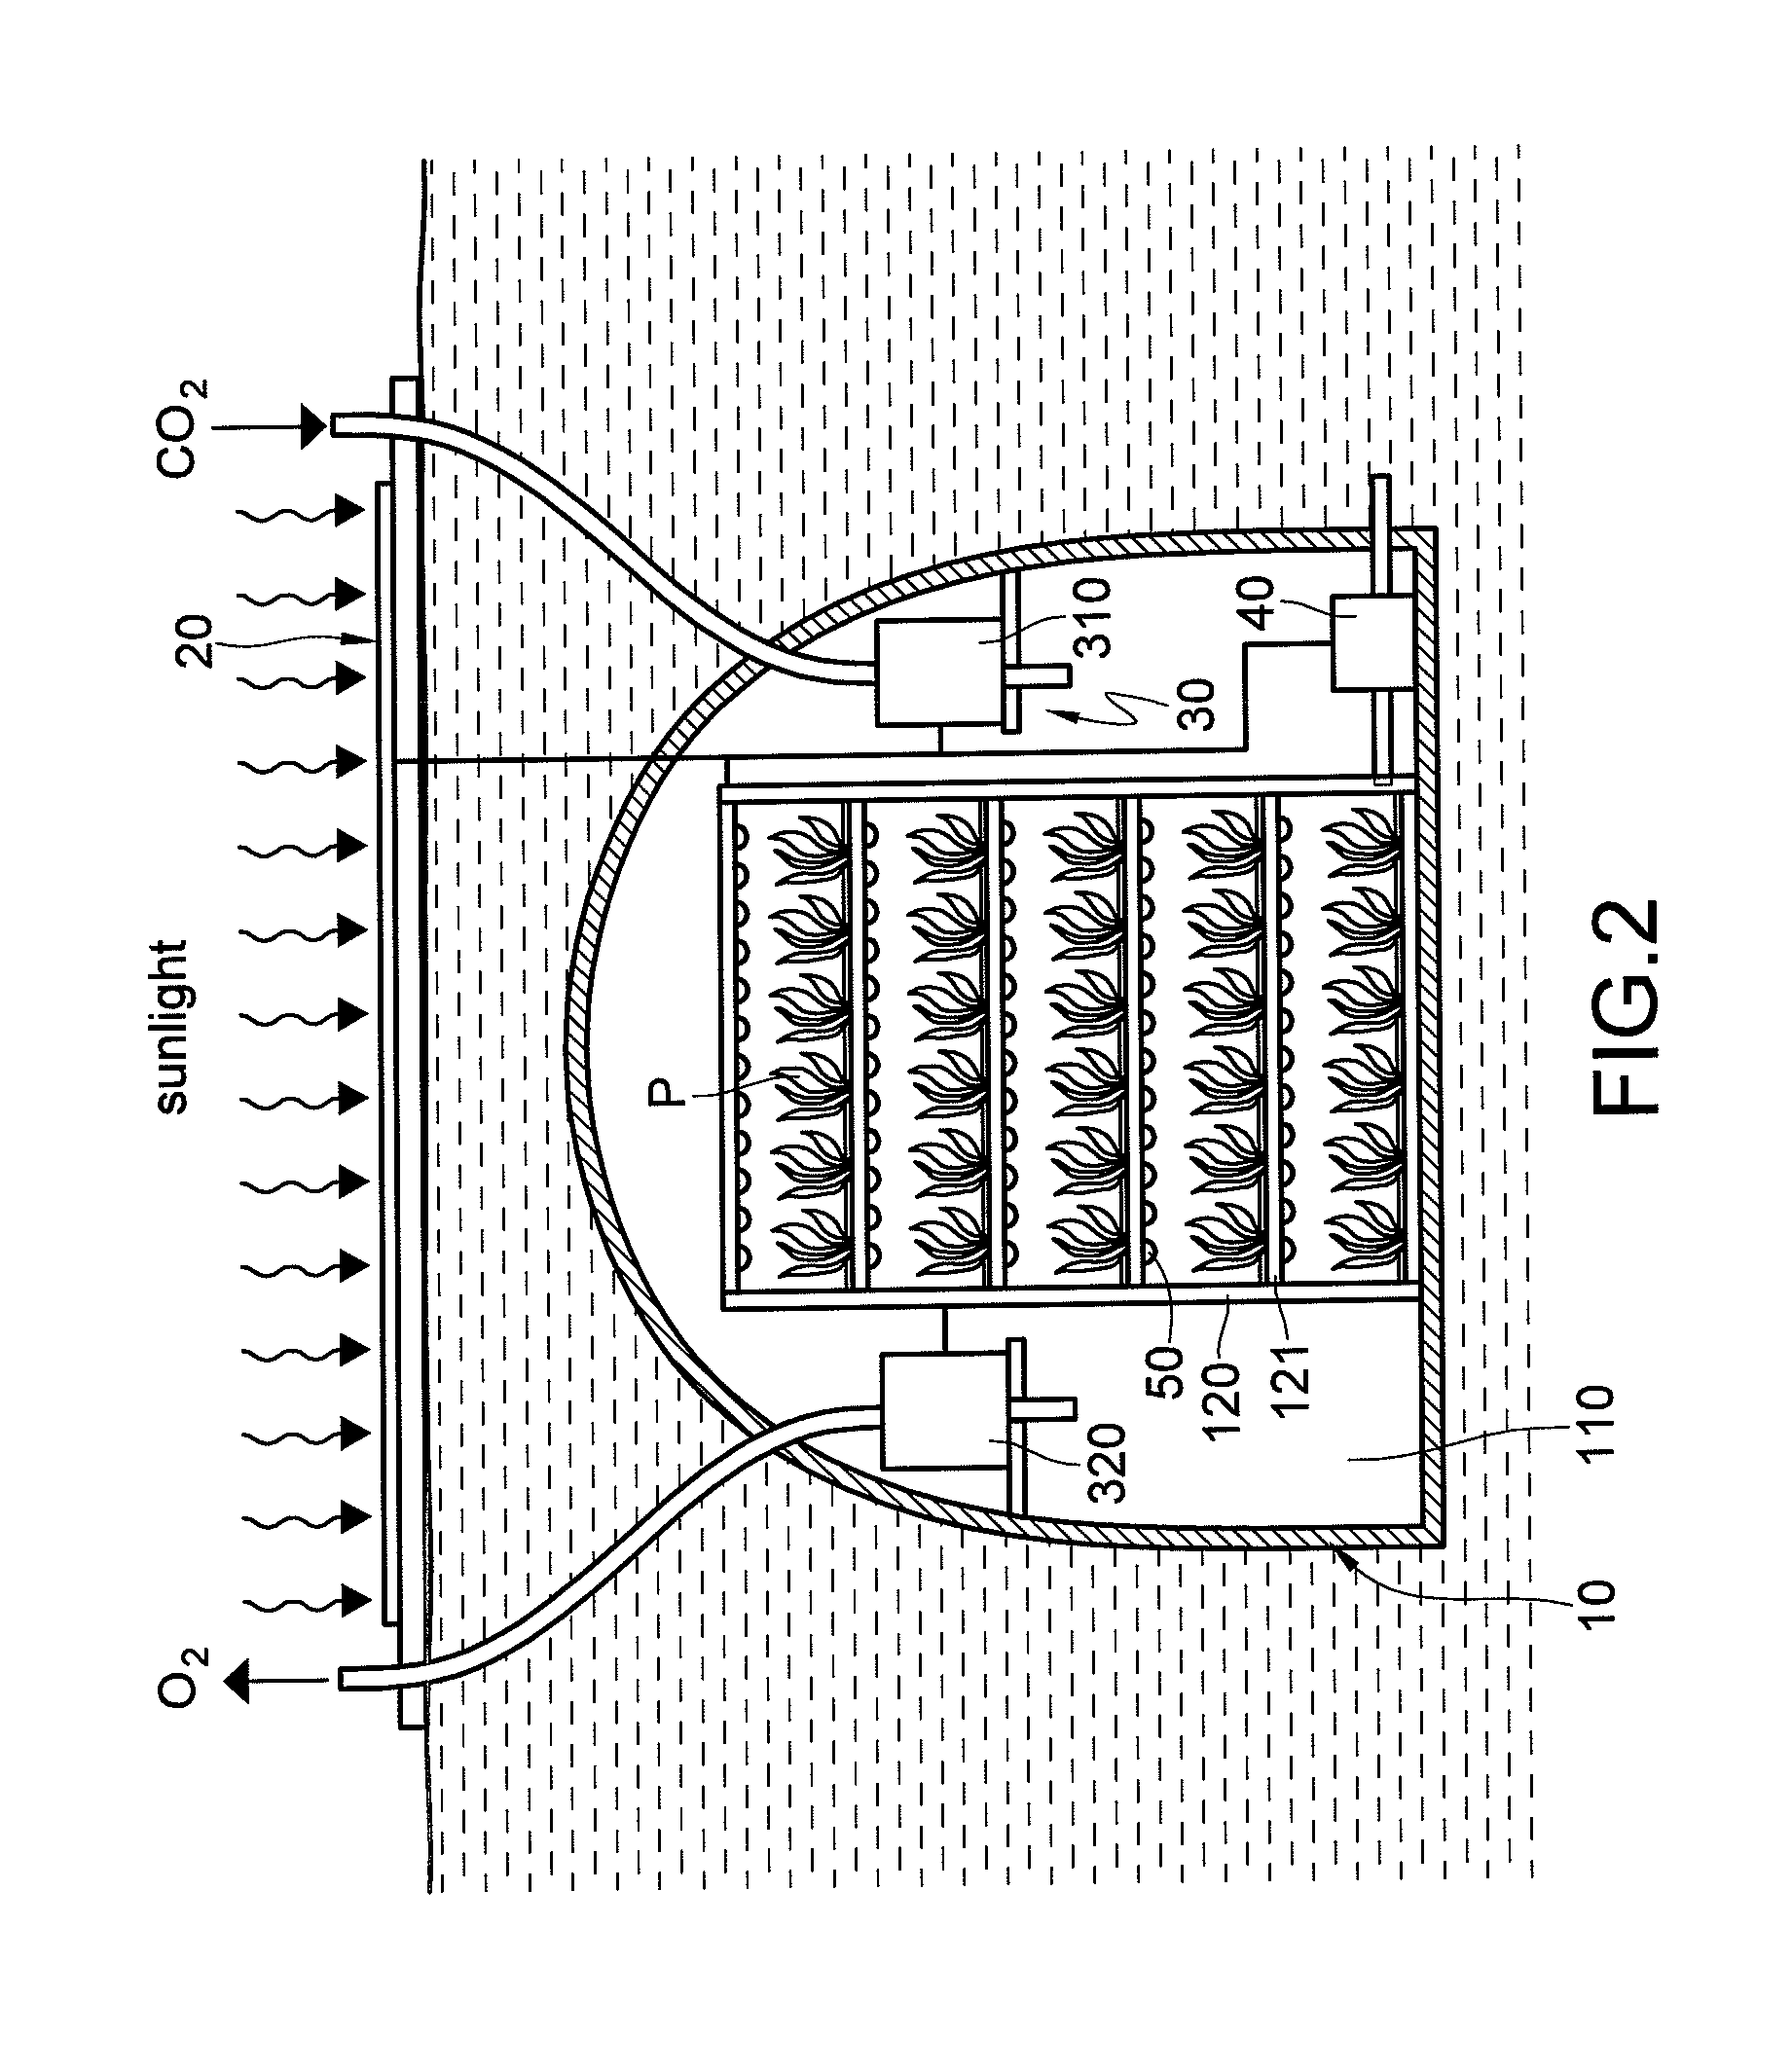 Plant-growing device with light emitting diode